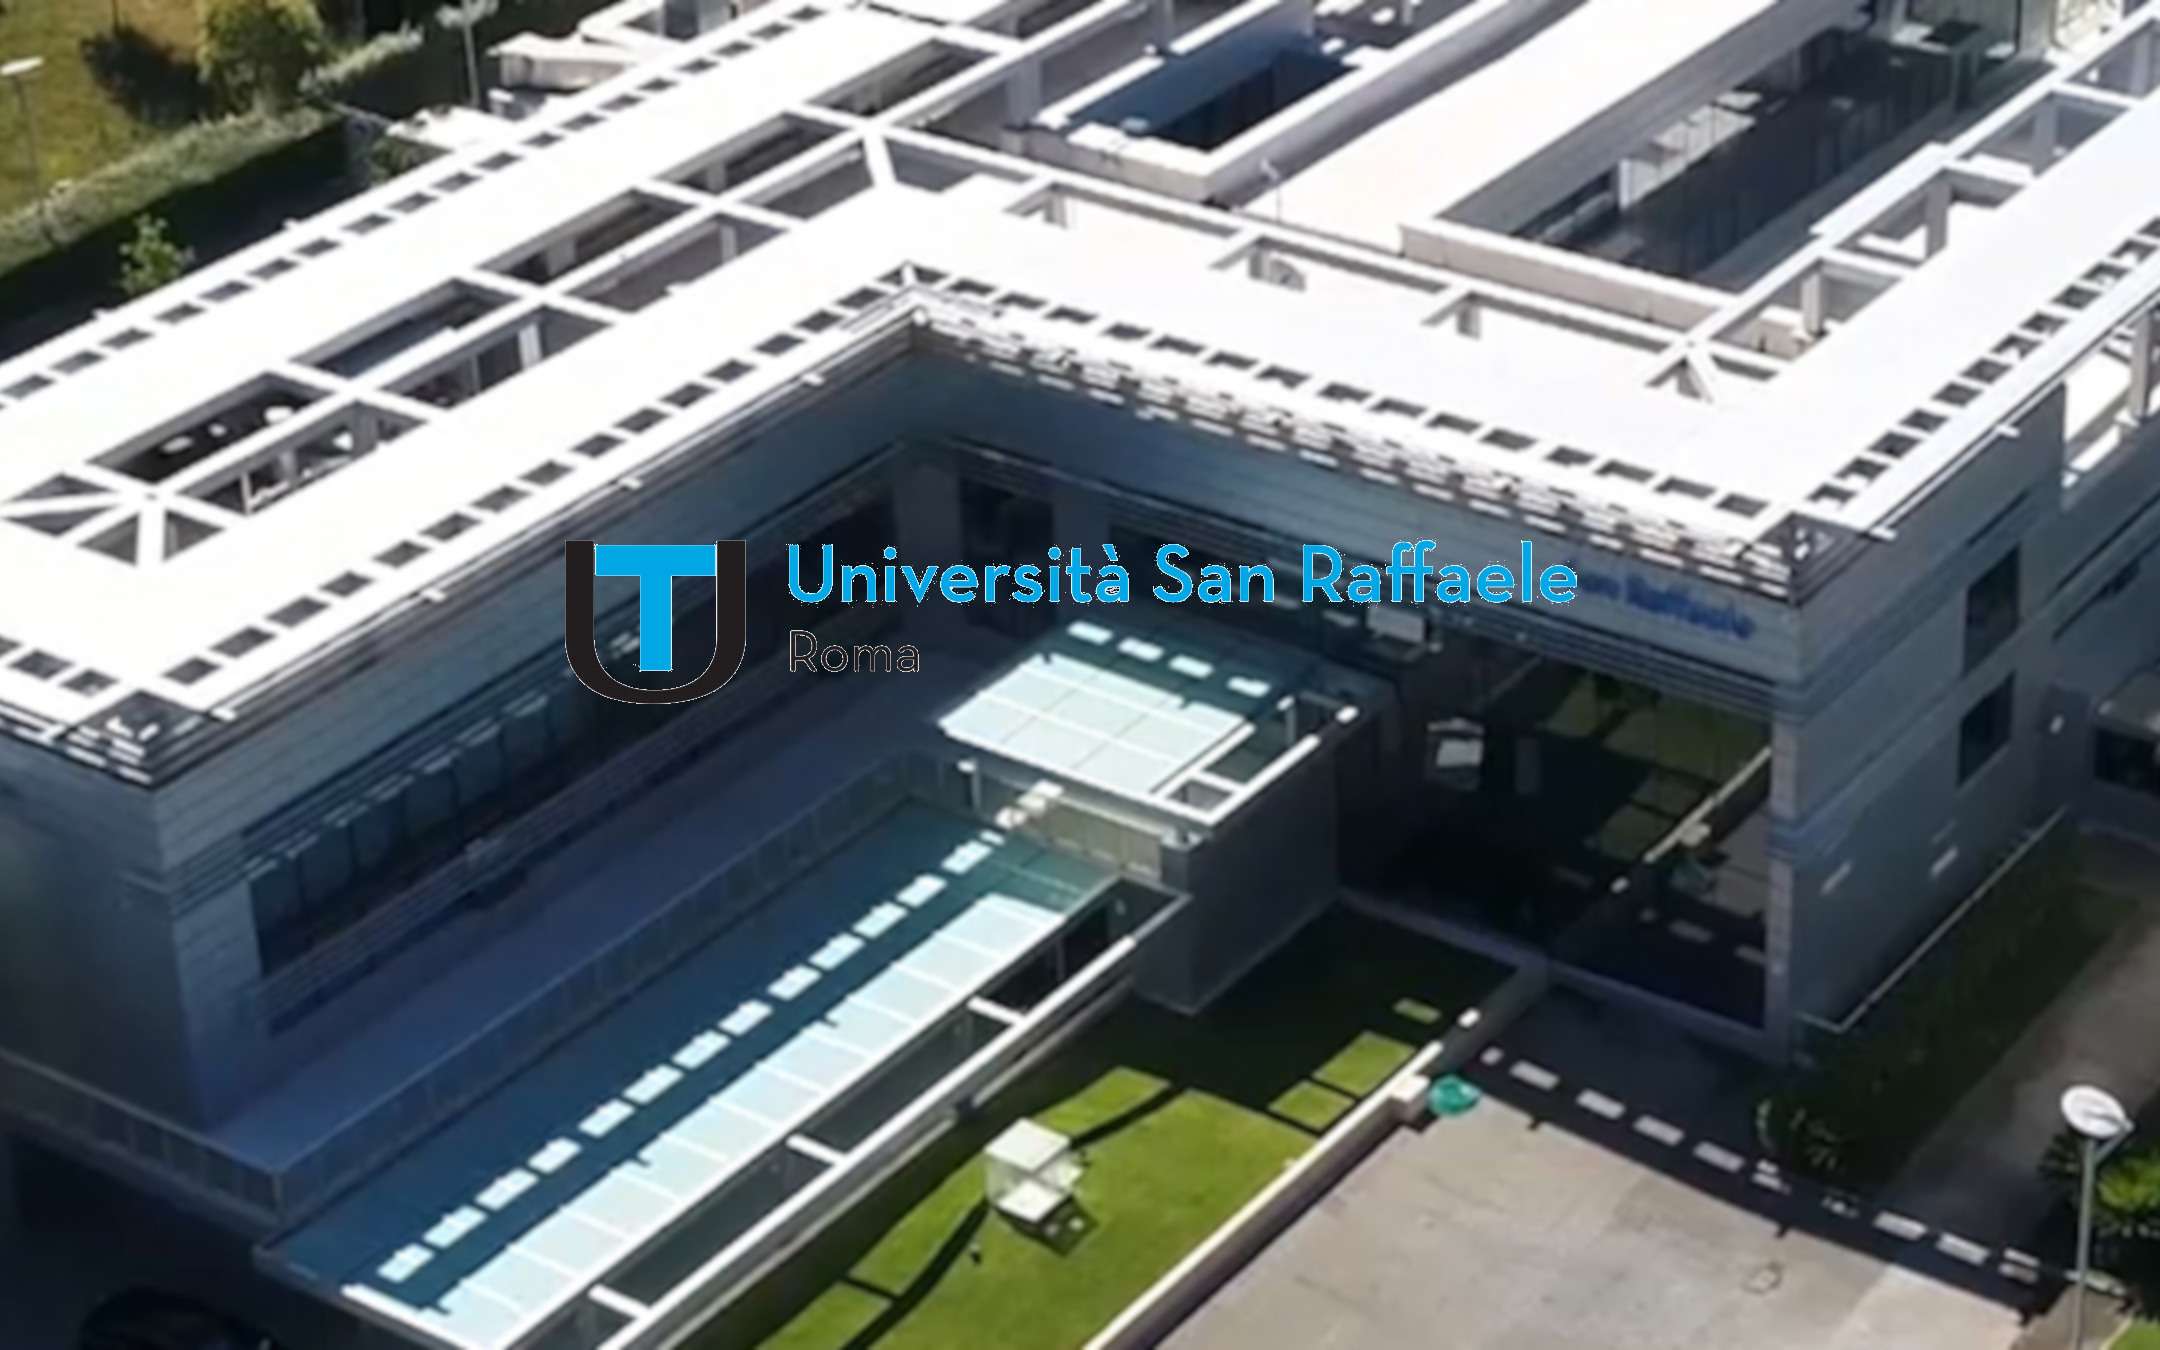 San Raffaele Telematic University Rome: Details, Costs and Opinions